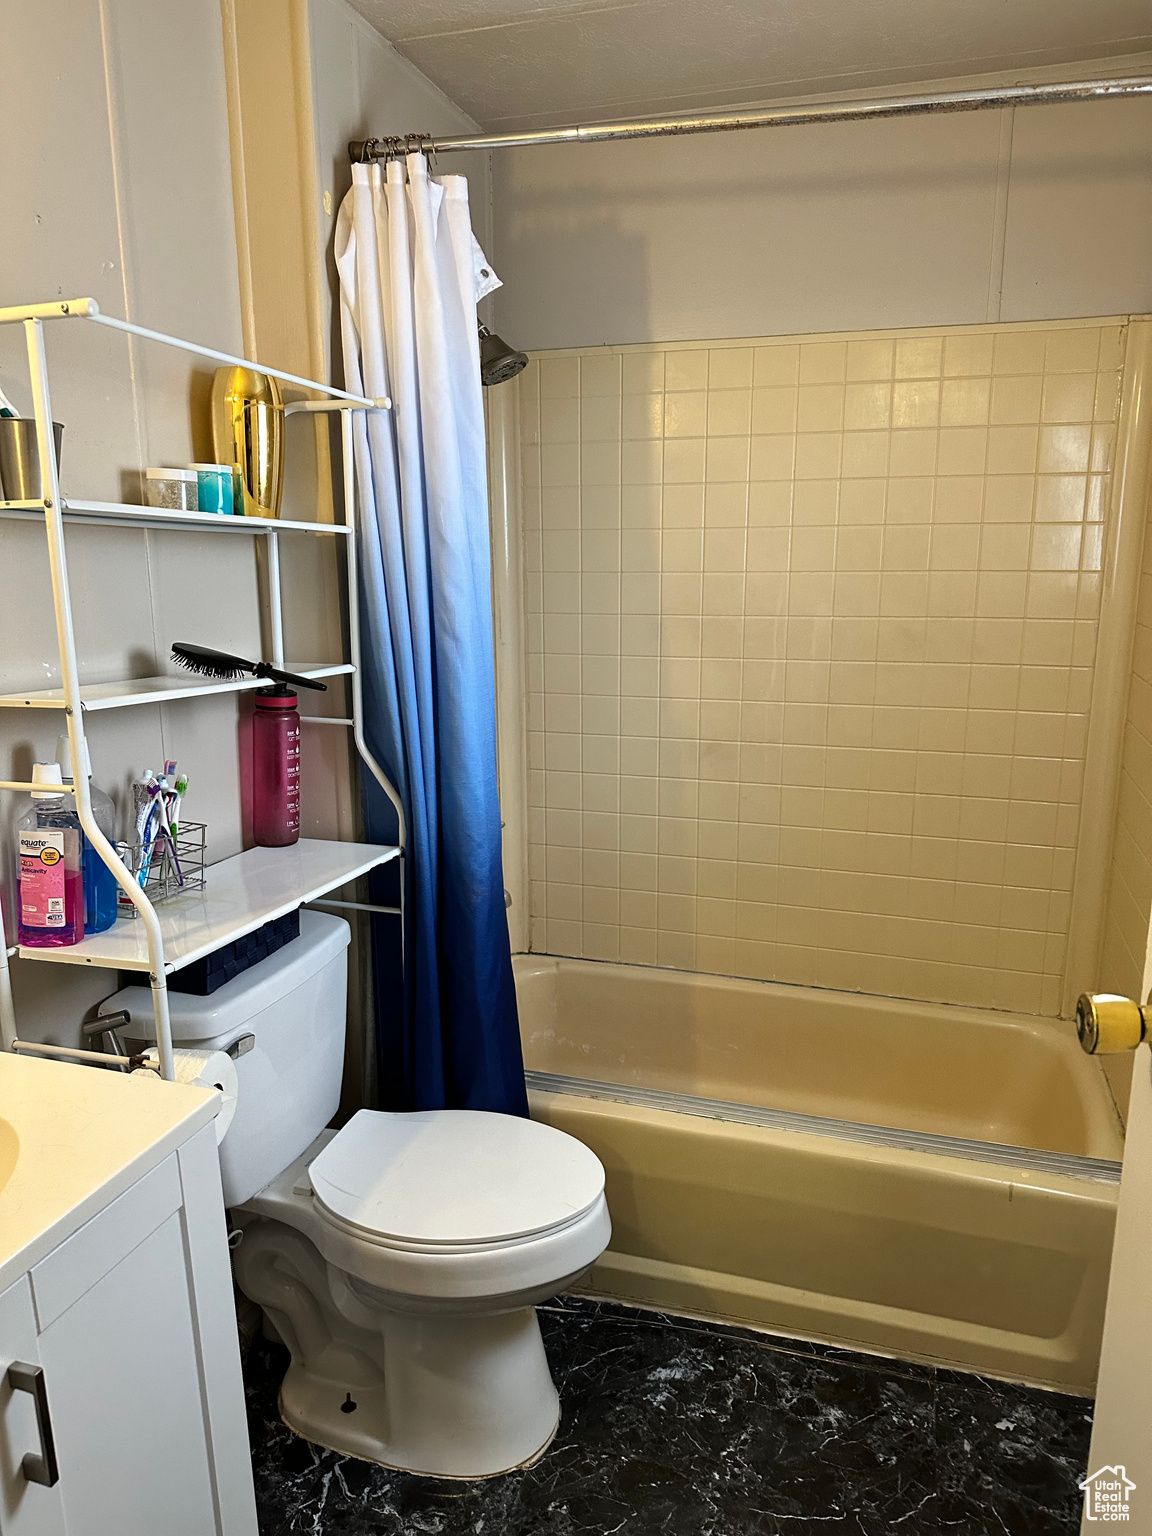 Full bathroom with vanity, toilet, tile flooring, and shower / bathtub combination with curtain